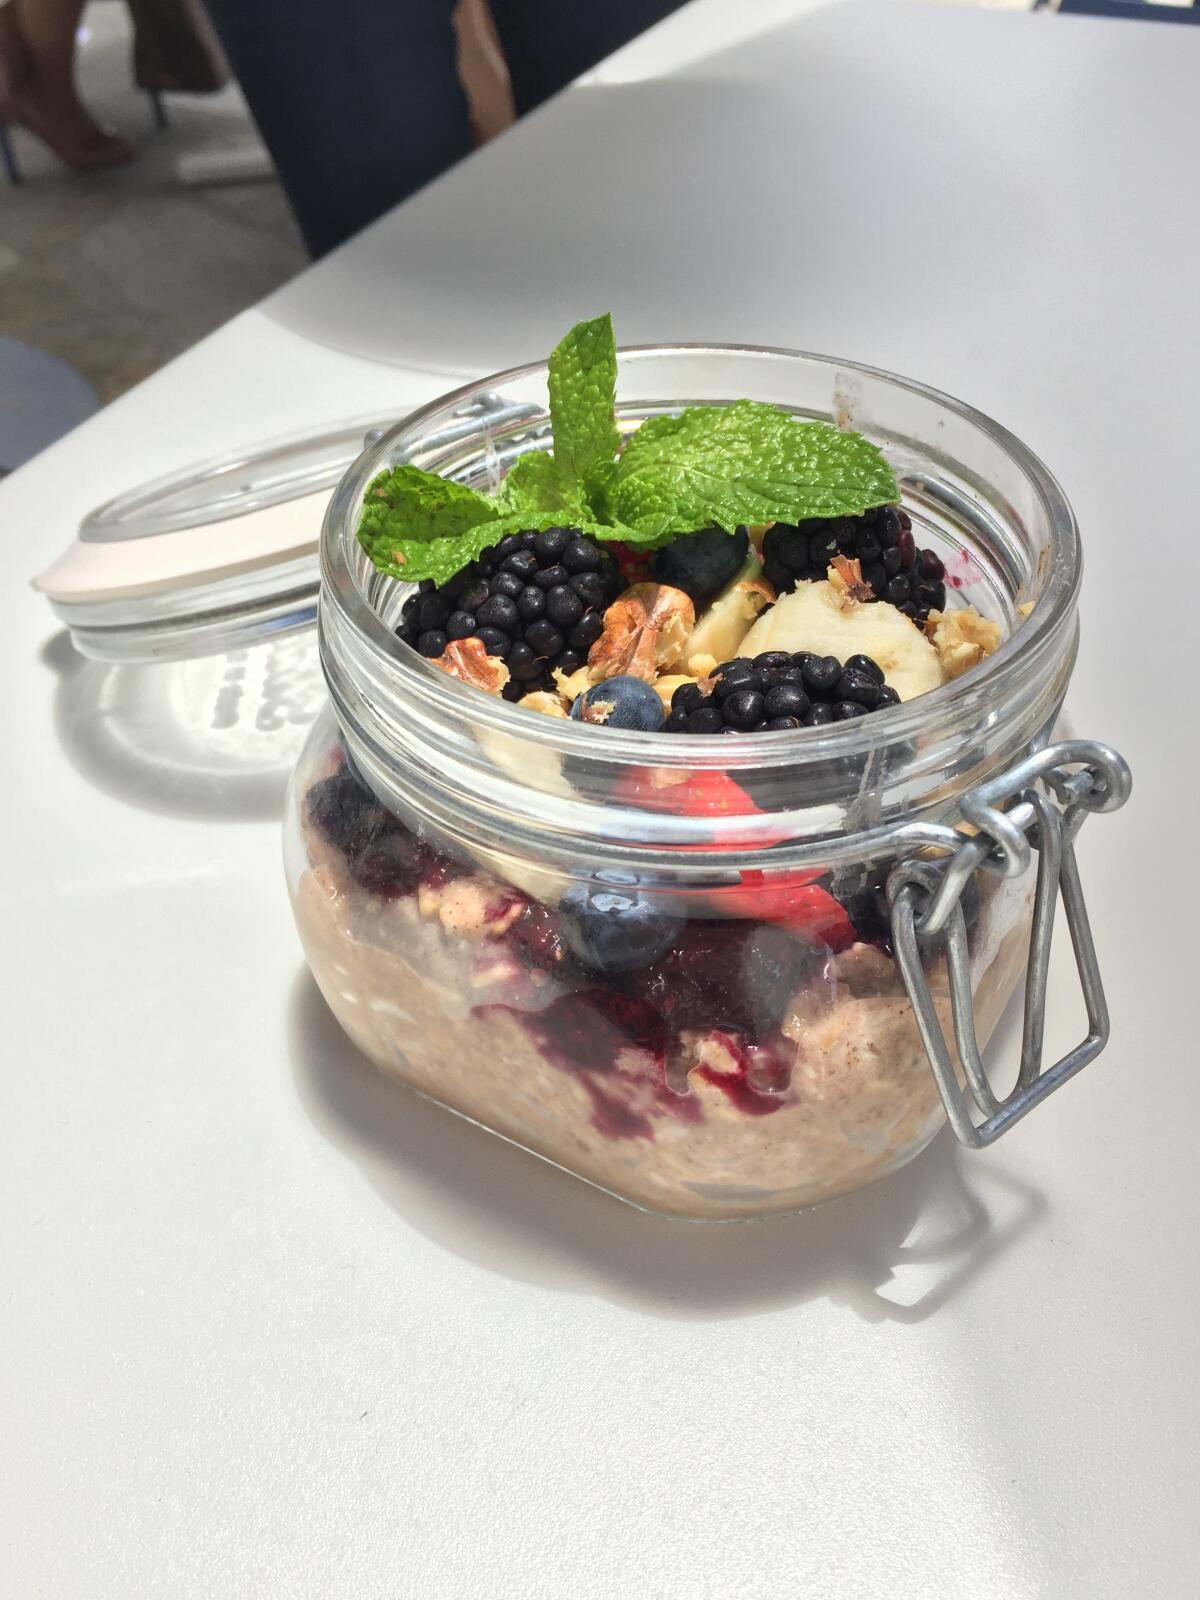 Chilled overnight oats with chia pudding, homemade preserved fruit, flaxseed and nuts, at Parakeet Cafe.